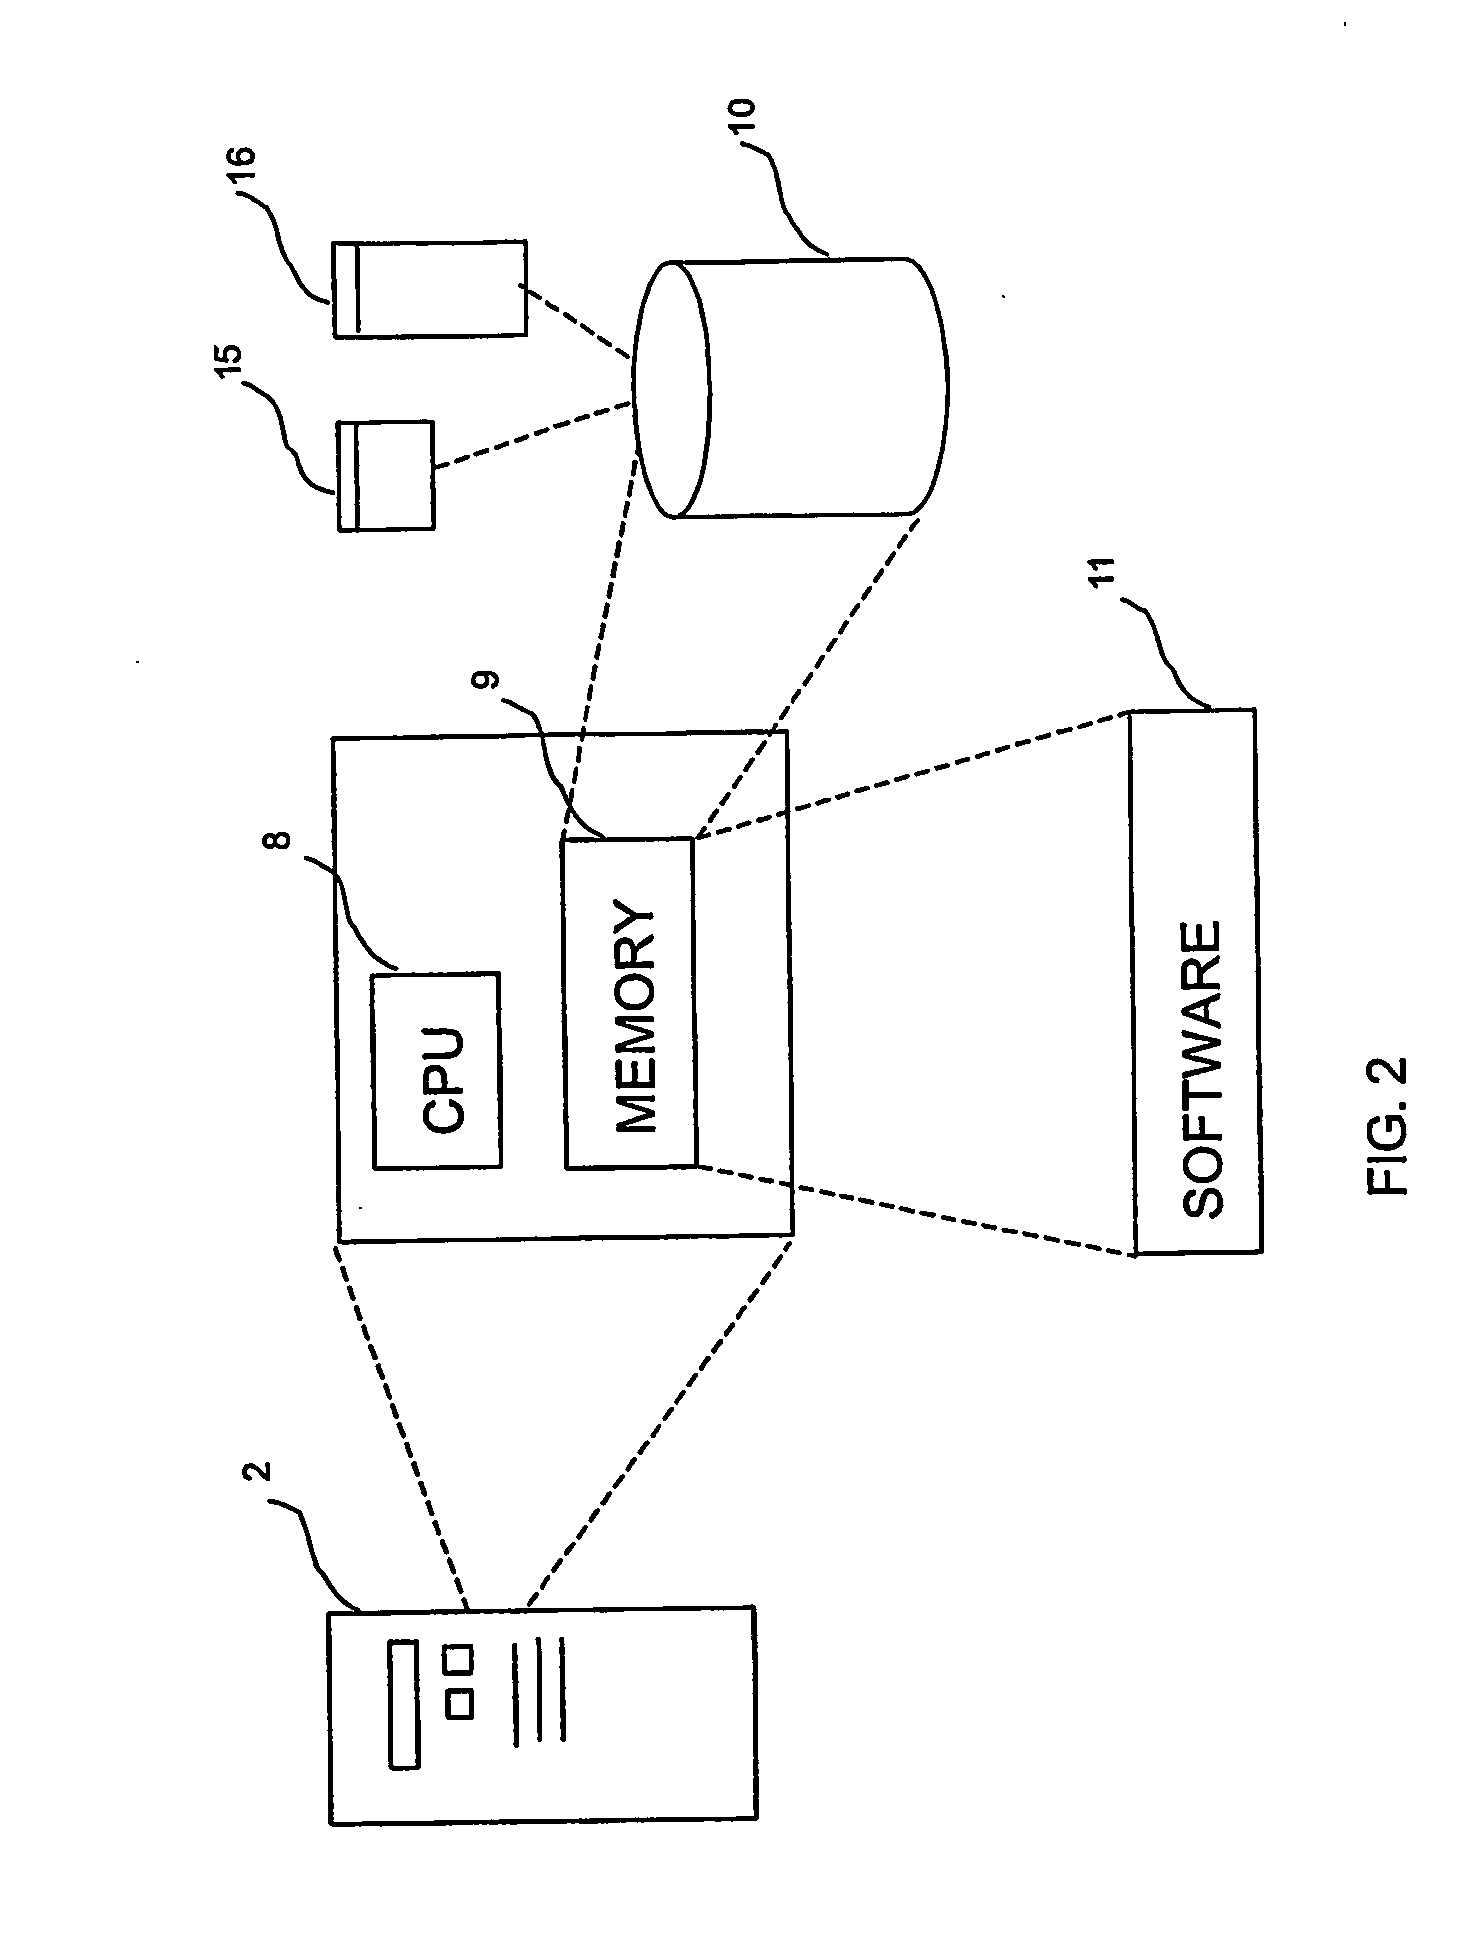 System for permission-based communication and exchange of information